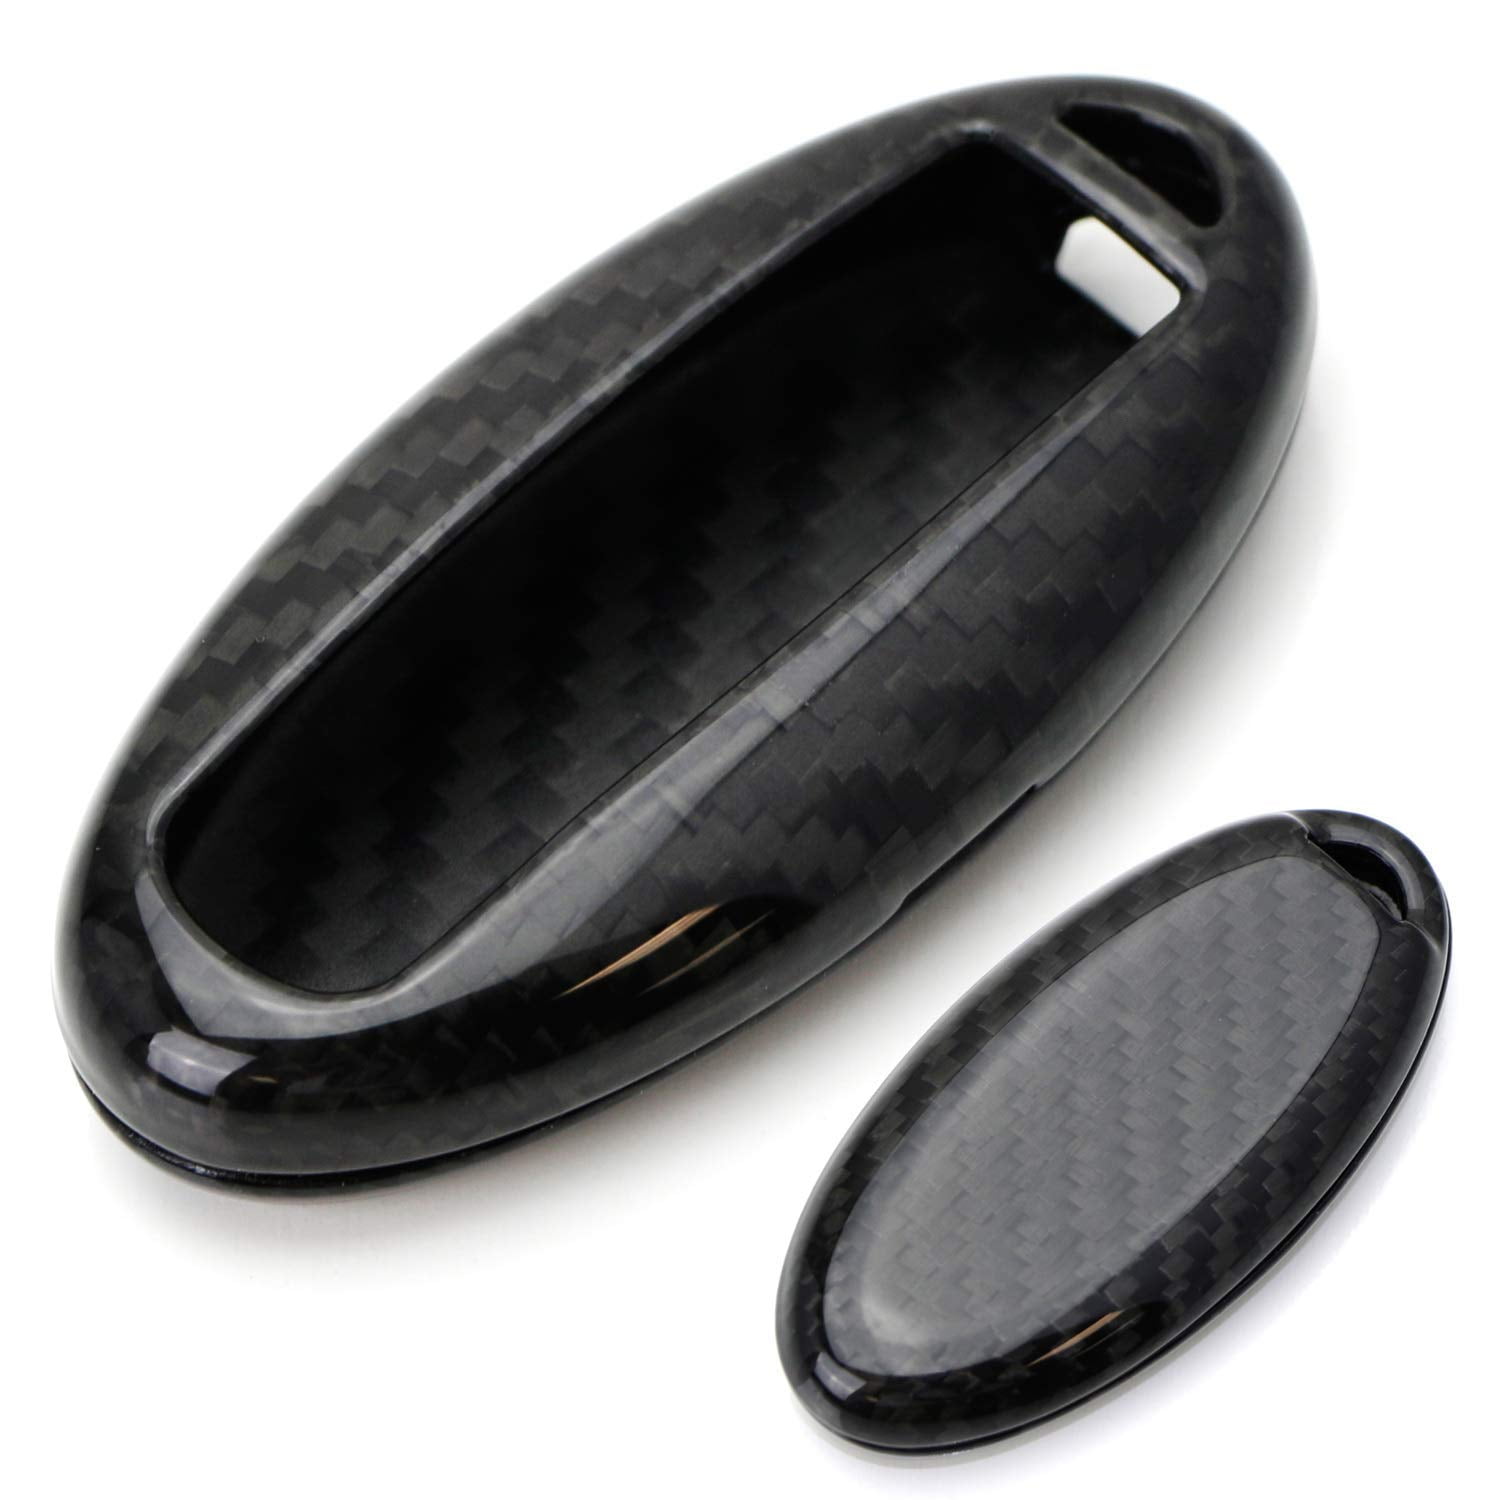 1x Carbon Fiber Remote Key FOB Cover Case 4 Buttons For Infiniti Nisaan Q50 FX35 